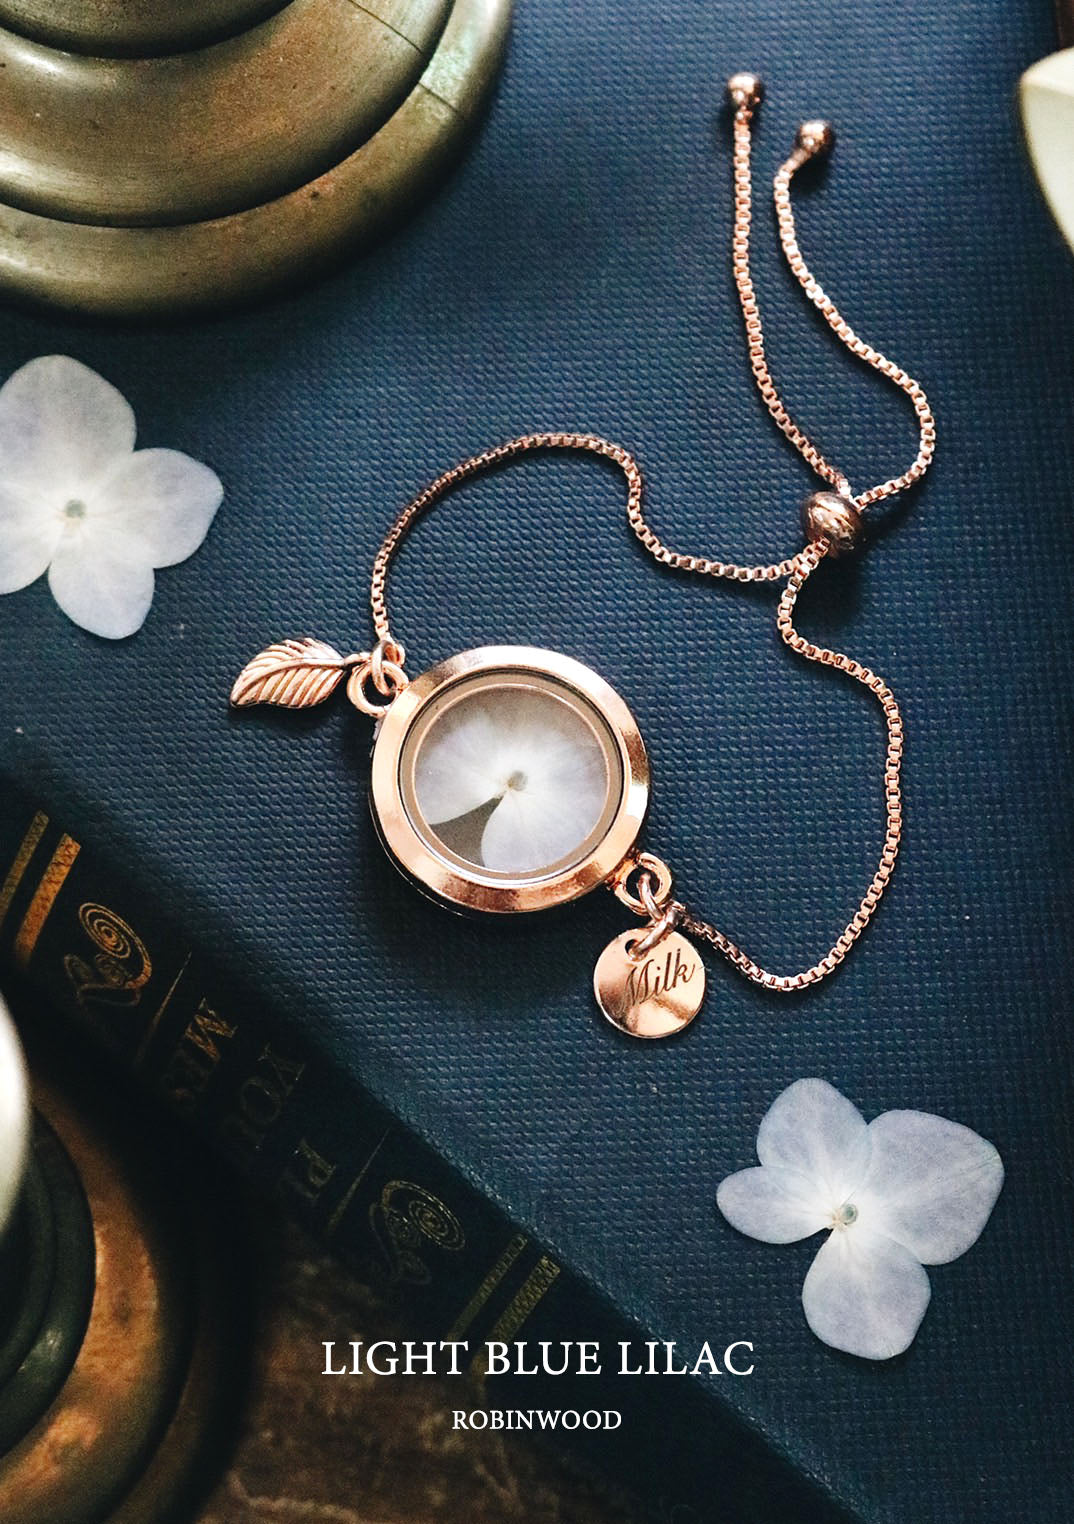 " October Collection's " Rosegold Locket & Snake Chain, White Blue Lilac Flower, Robinwood